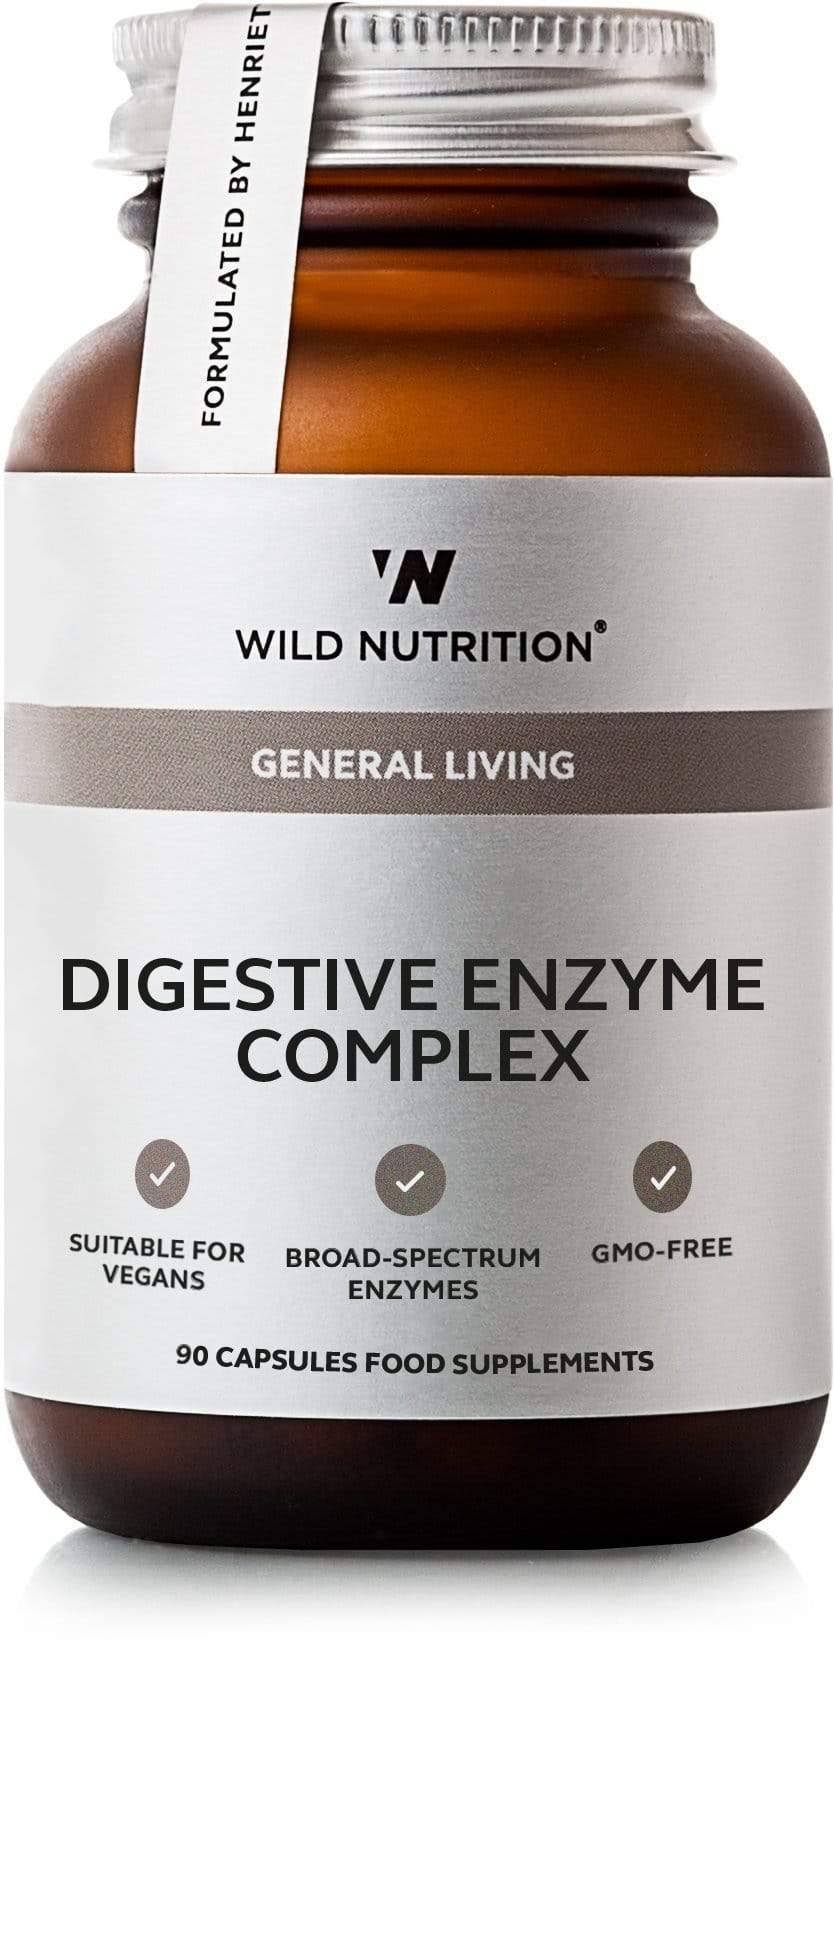 Wild Nutrition Digestive Enzyme Complex Food Supplement - 90 Capsules